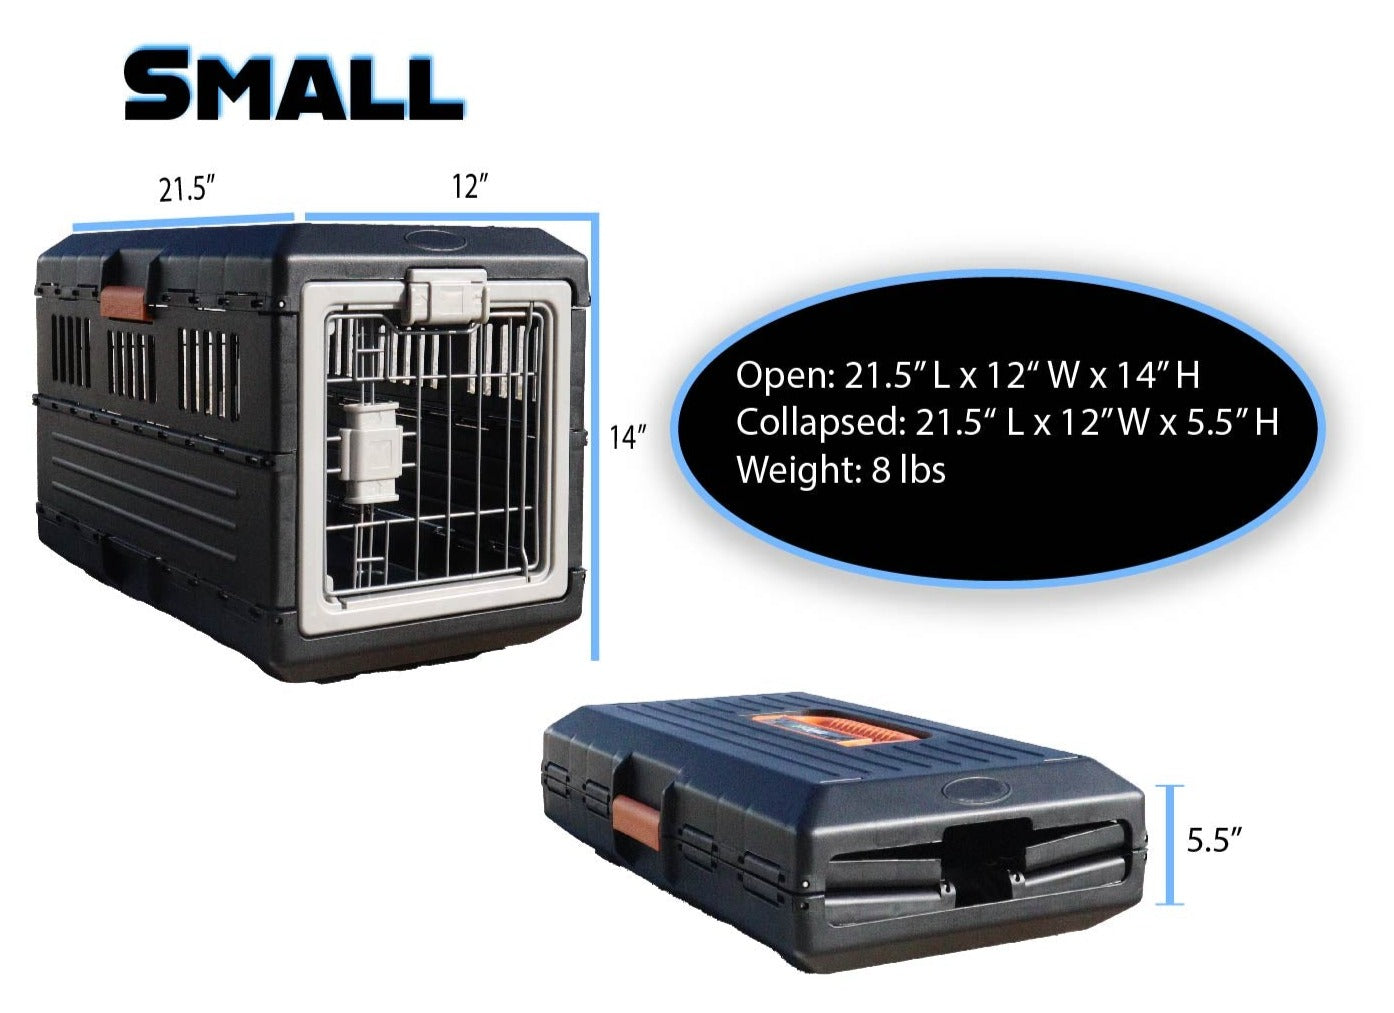 A photo of the Mirapet Medium Collapsible pet crate standing, and also closed with measurements around the sides. A black oval with white text that says "Open: 26" L x 15.3" W x 18.8"H Collapsed: 26"L x 15.3"W x5.5"H Weight: 13lbs